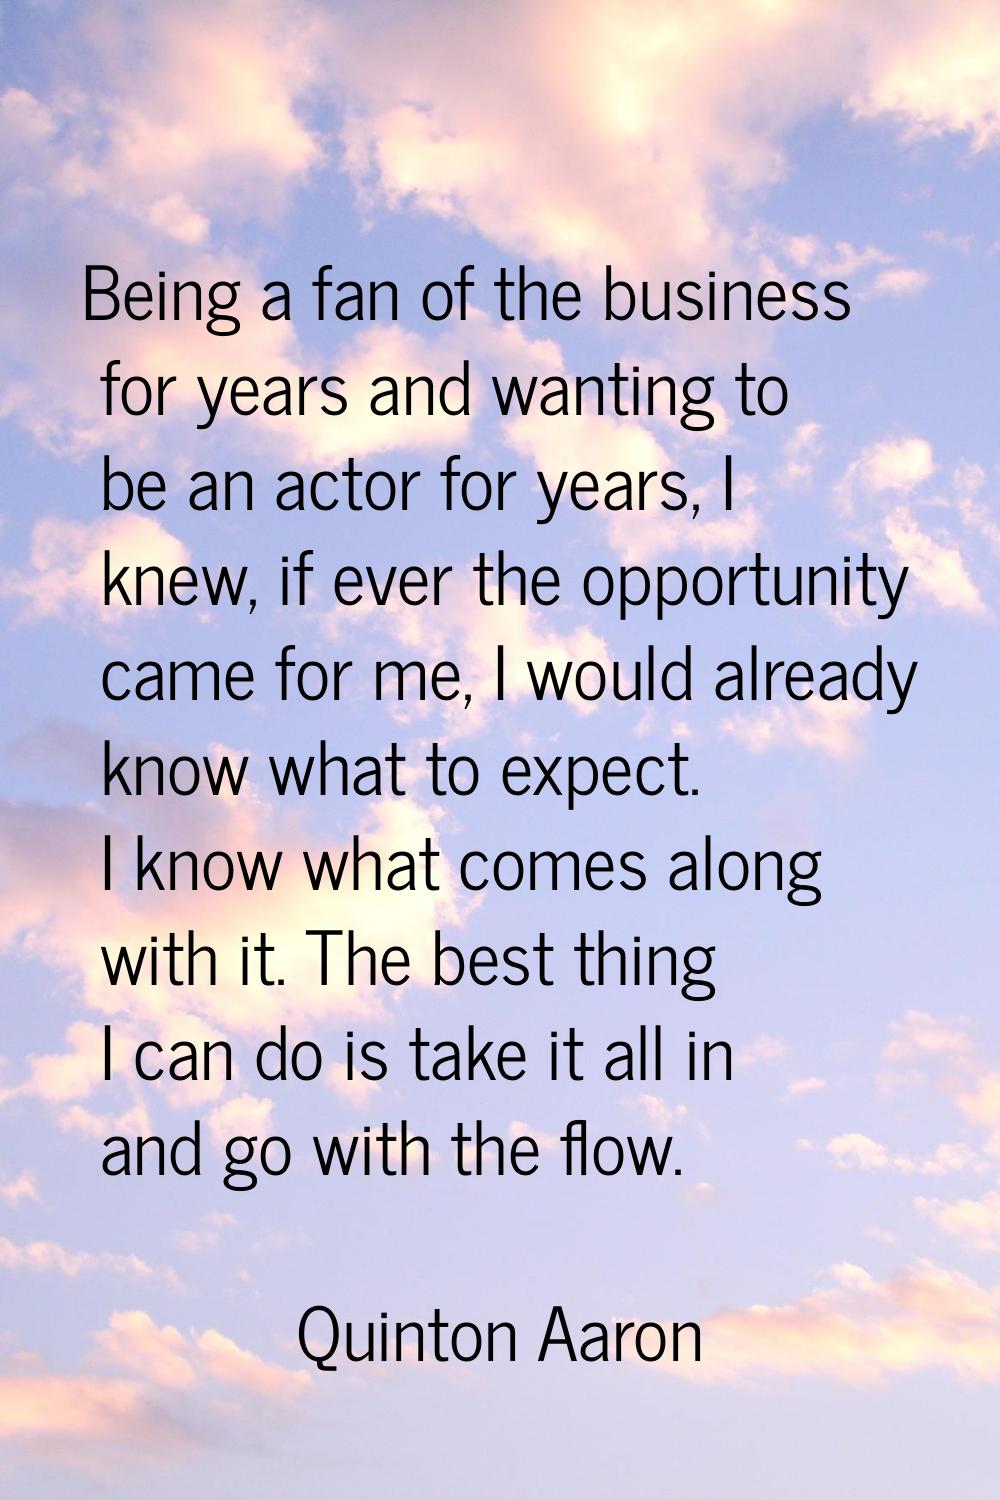 Being a fan of the business for years and wanting to be an actor for years, I knew, if ever the opp